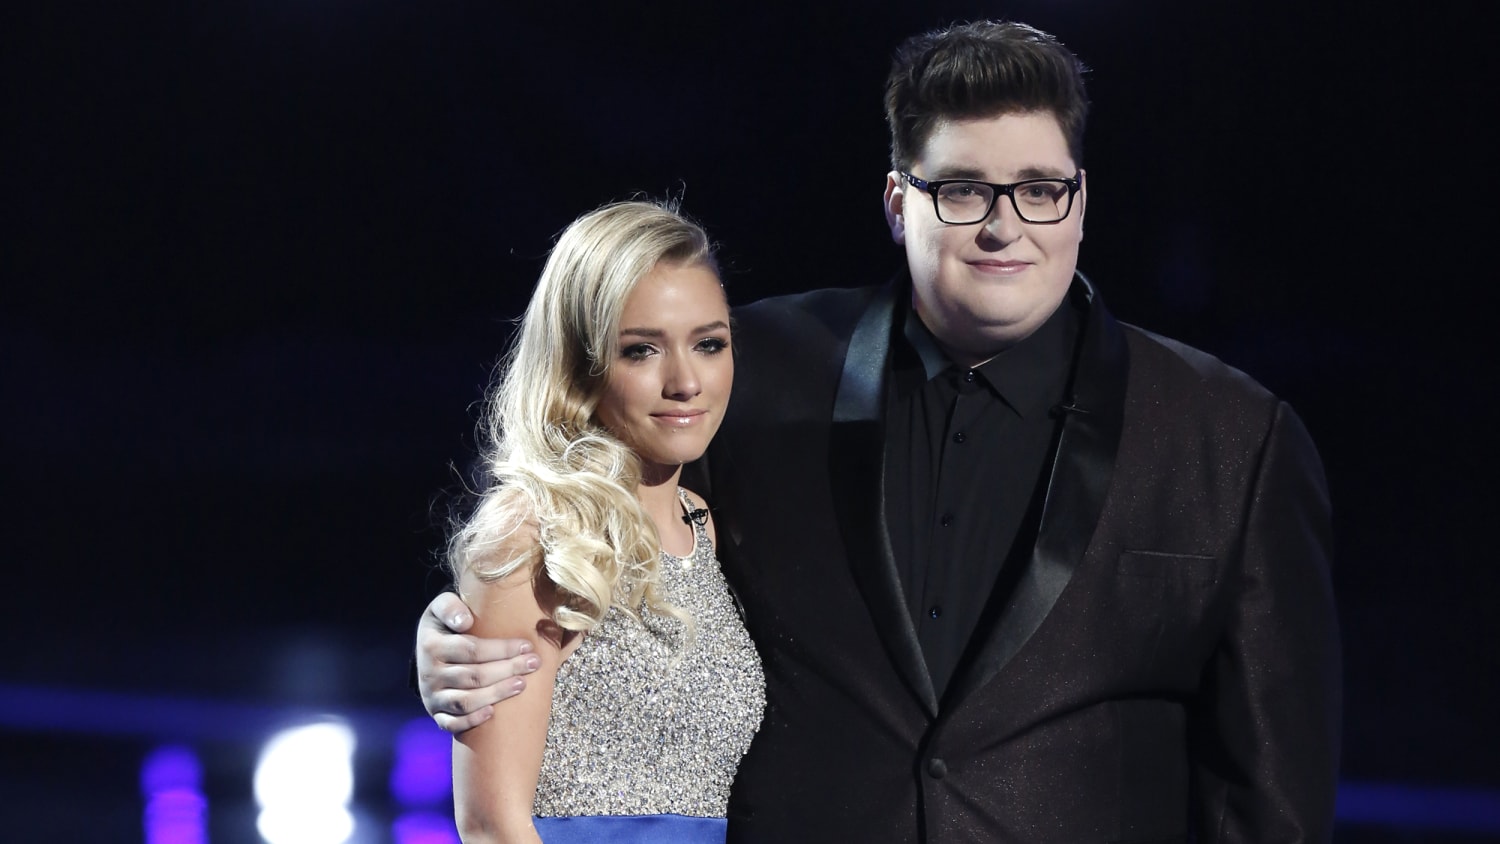 Jordan Smith crowned champion of Voice'